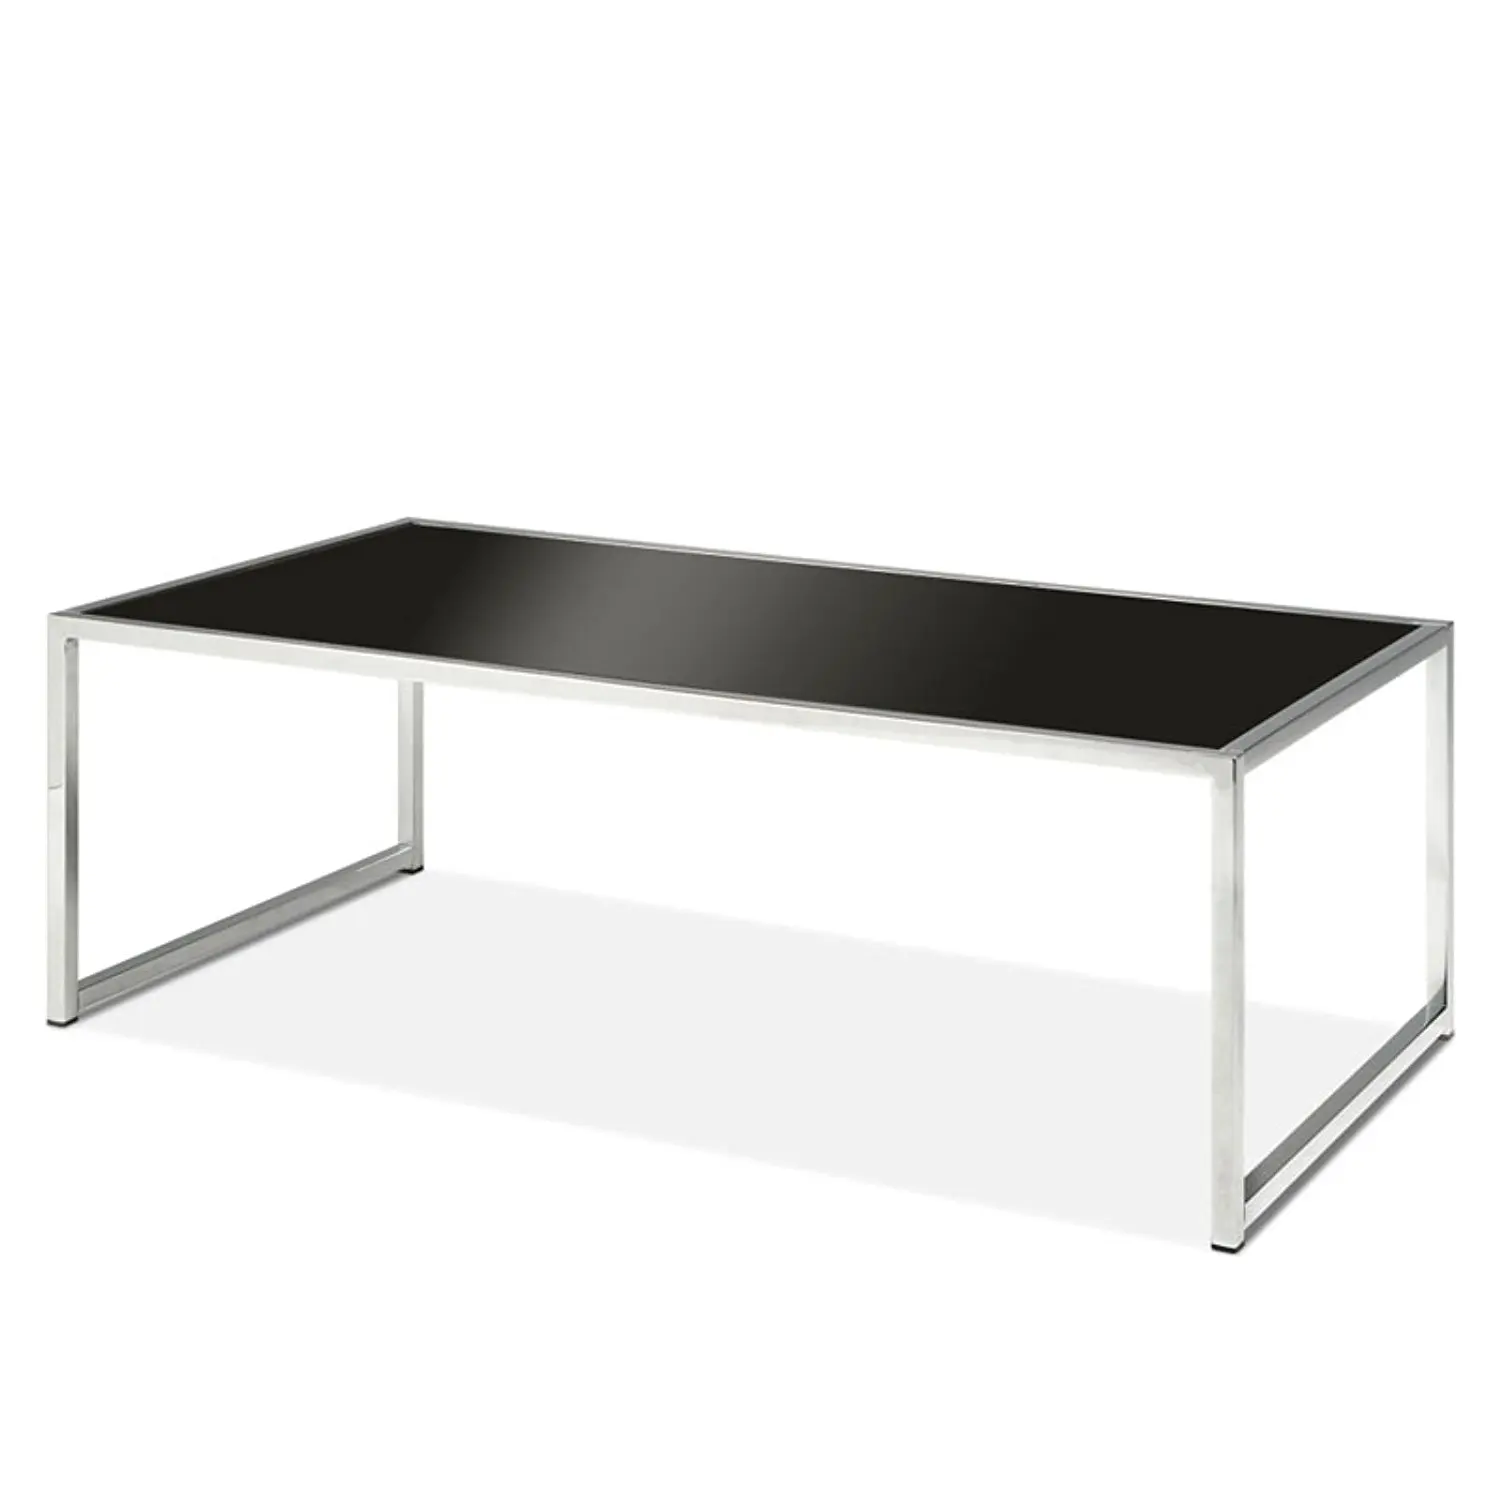 Round Mirrored Top Coffee Table In Wd3 Rivers For 50 00 For Sale Shpock